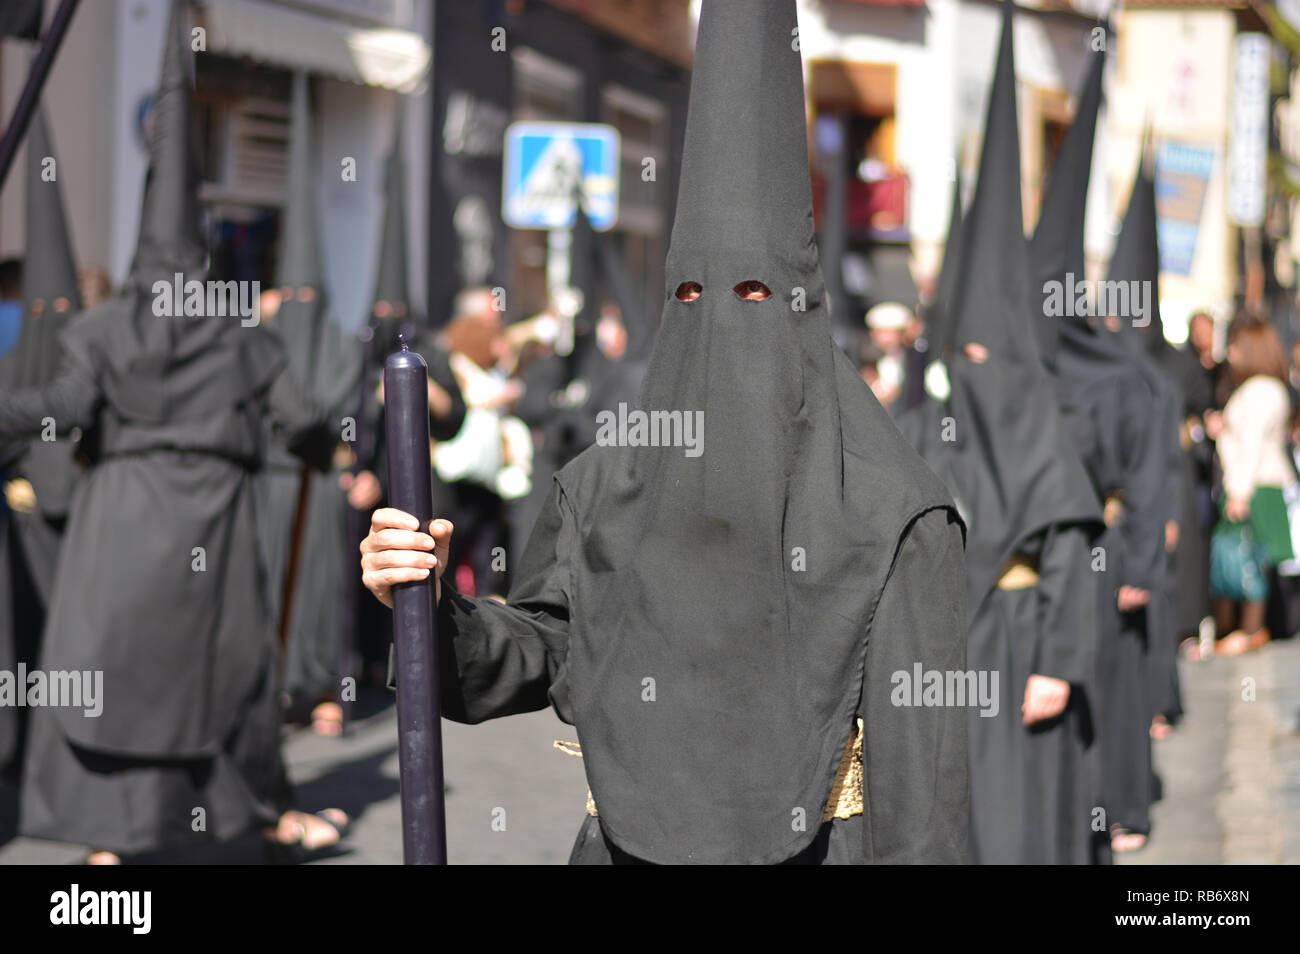 Hooded in black in a procession Stock Photo